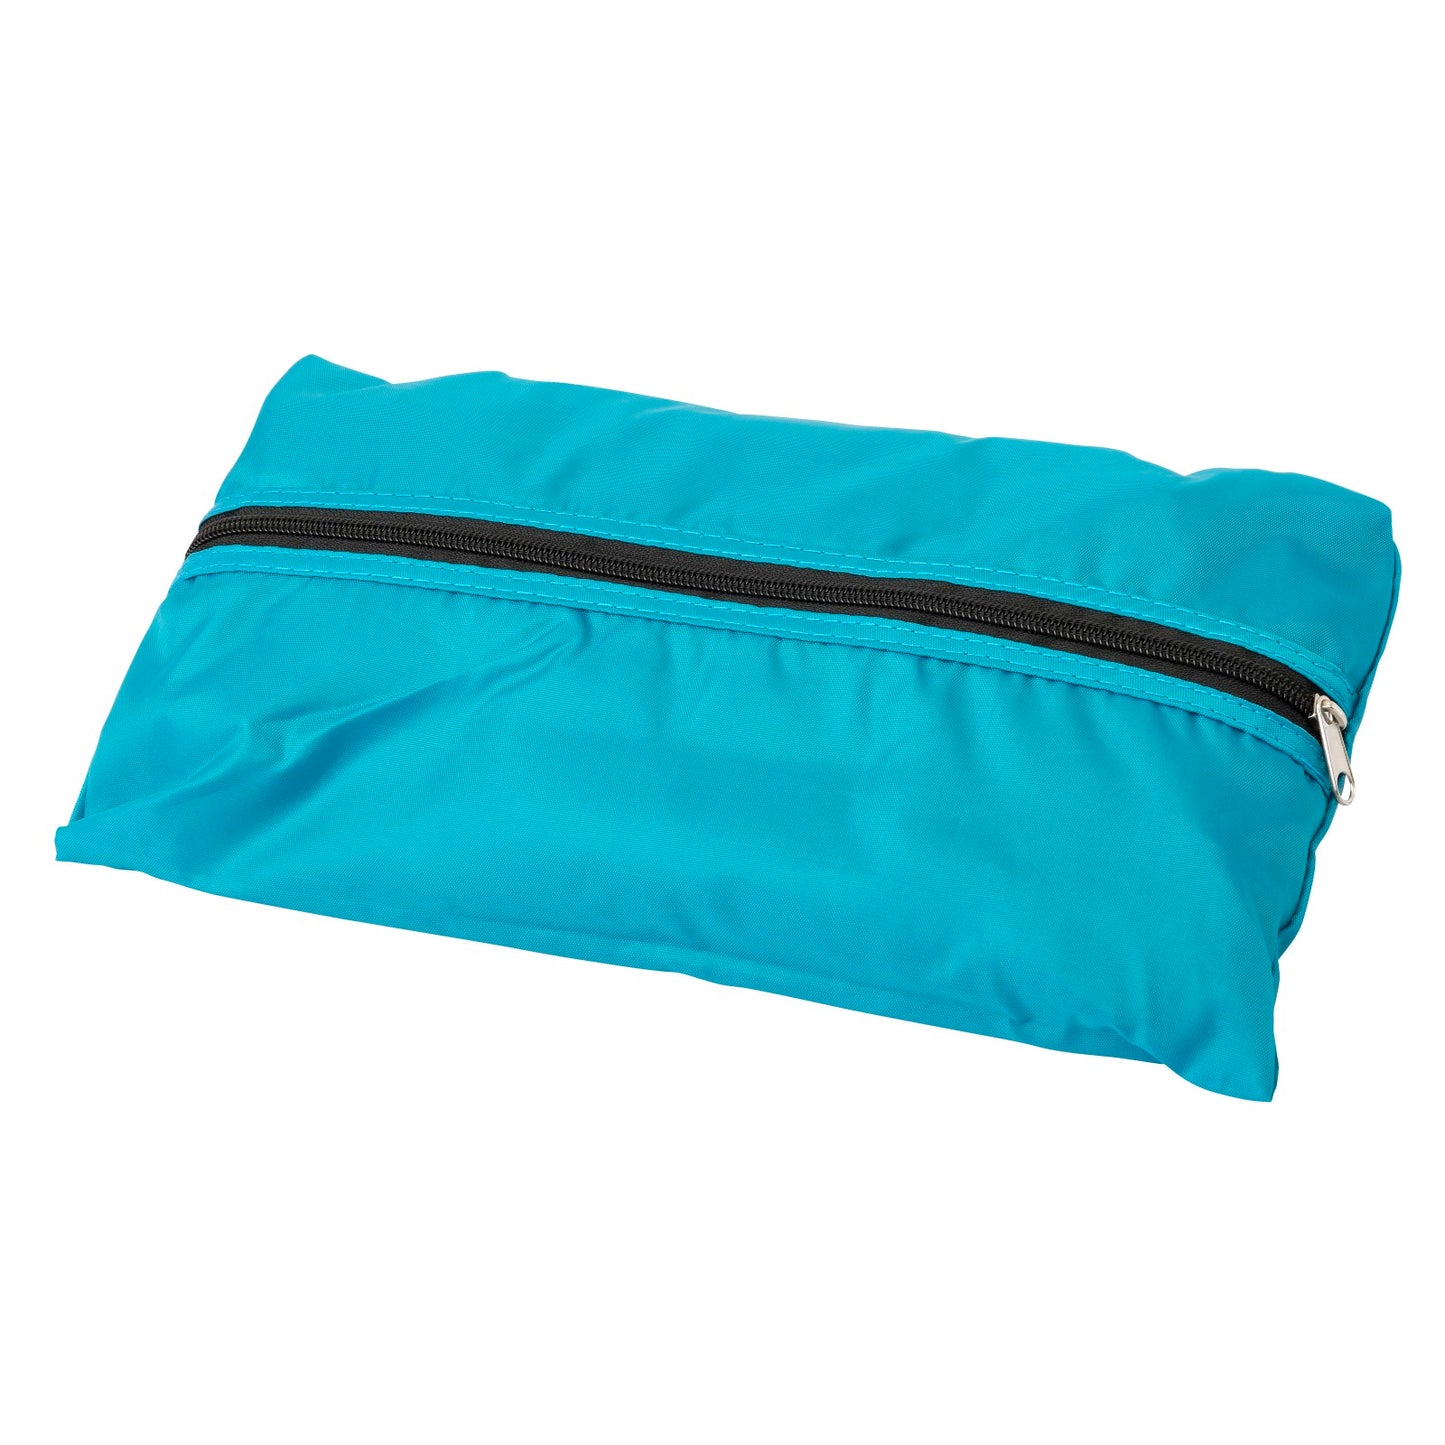 Shopping Cart Bag - Clever Shopper - Teal – Clever Organizing Solutions